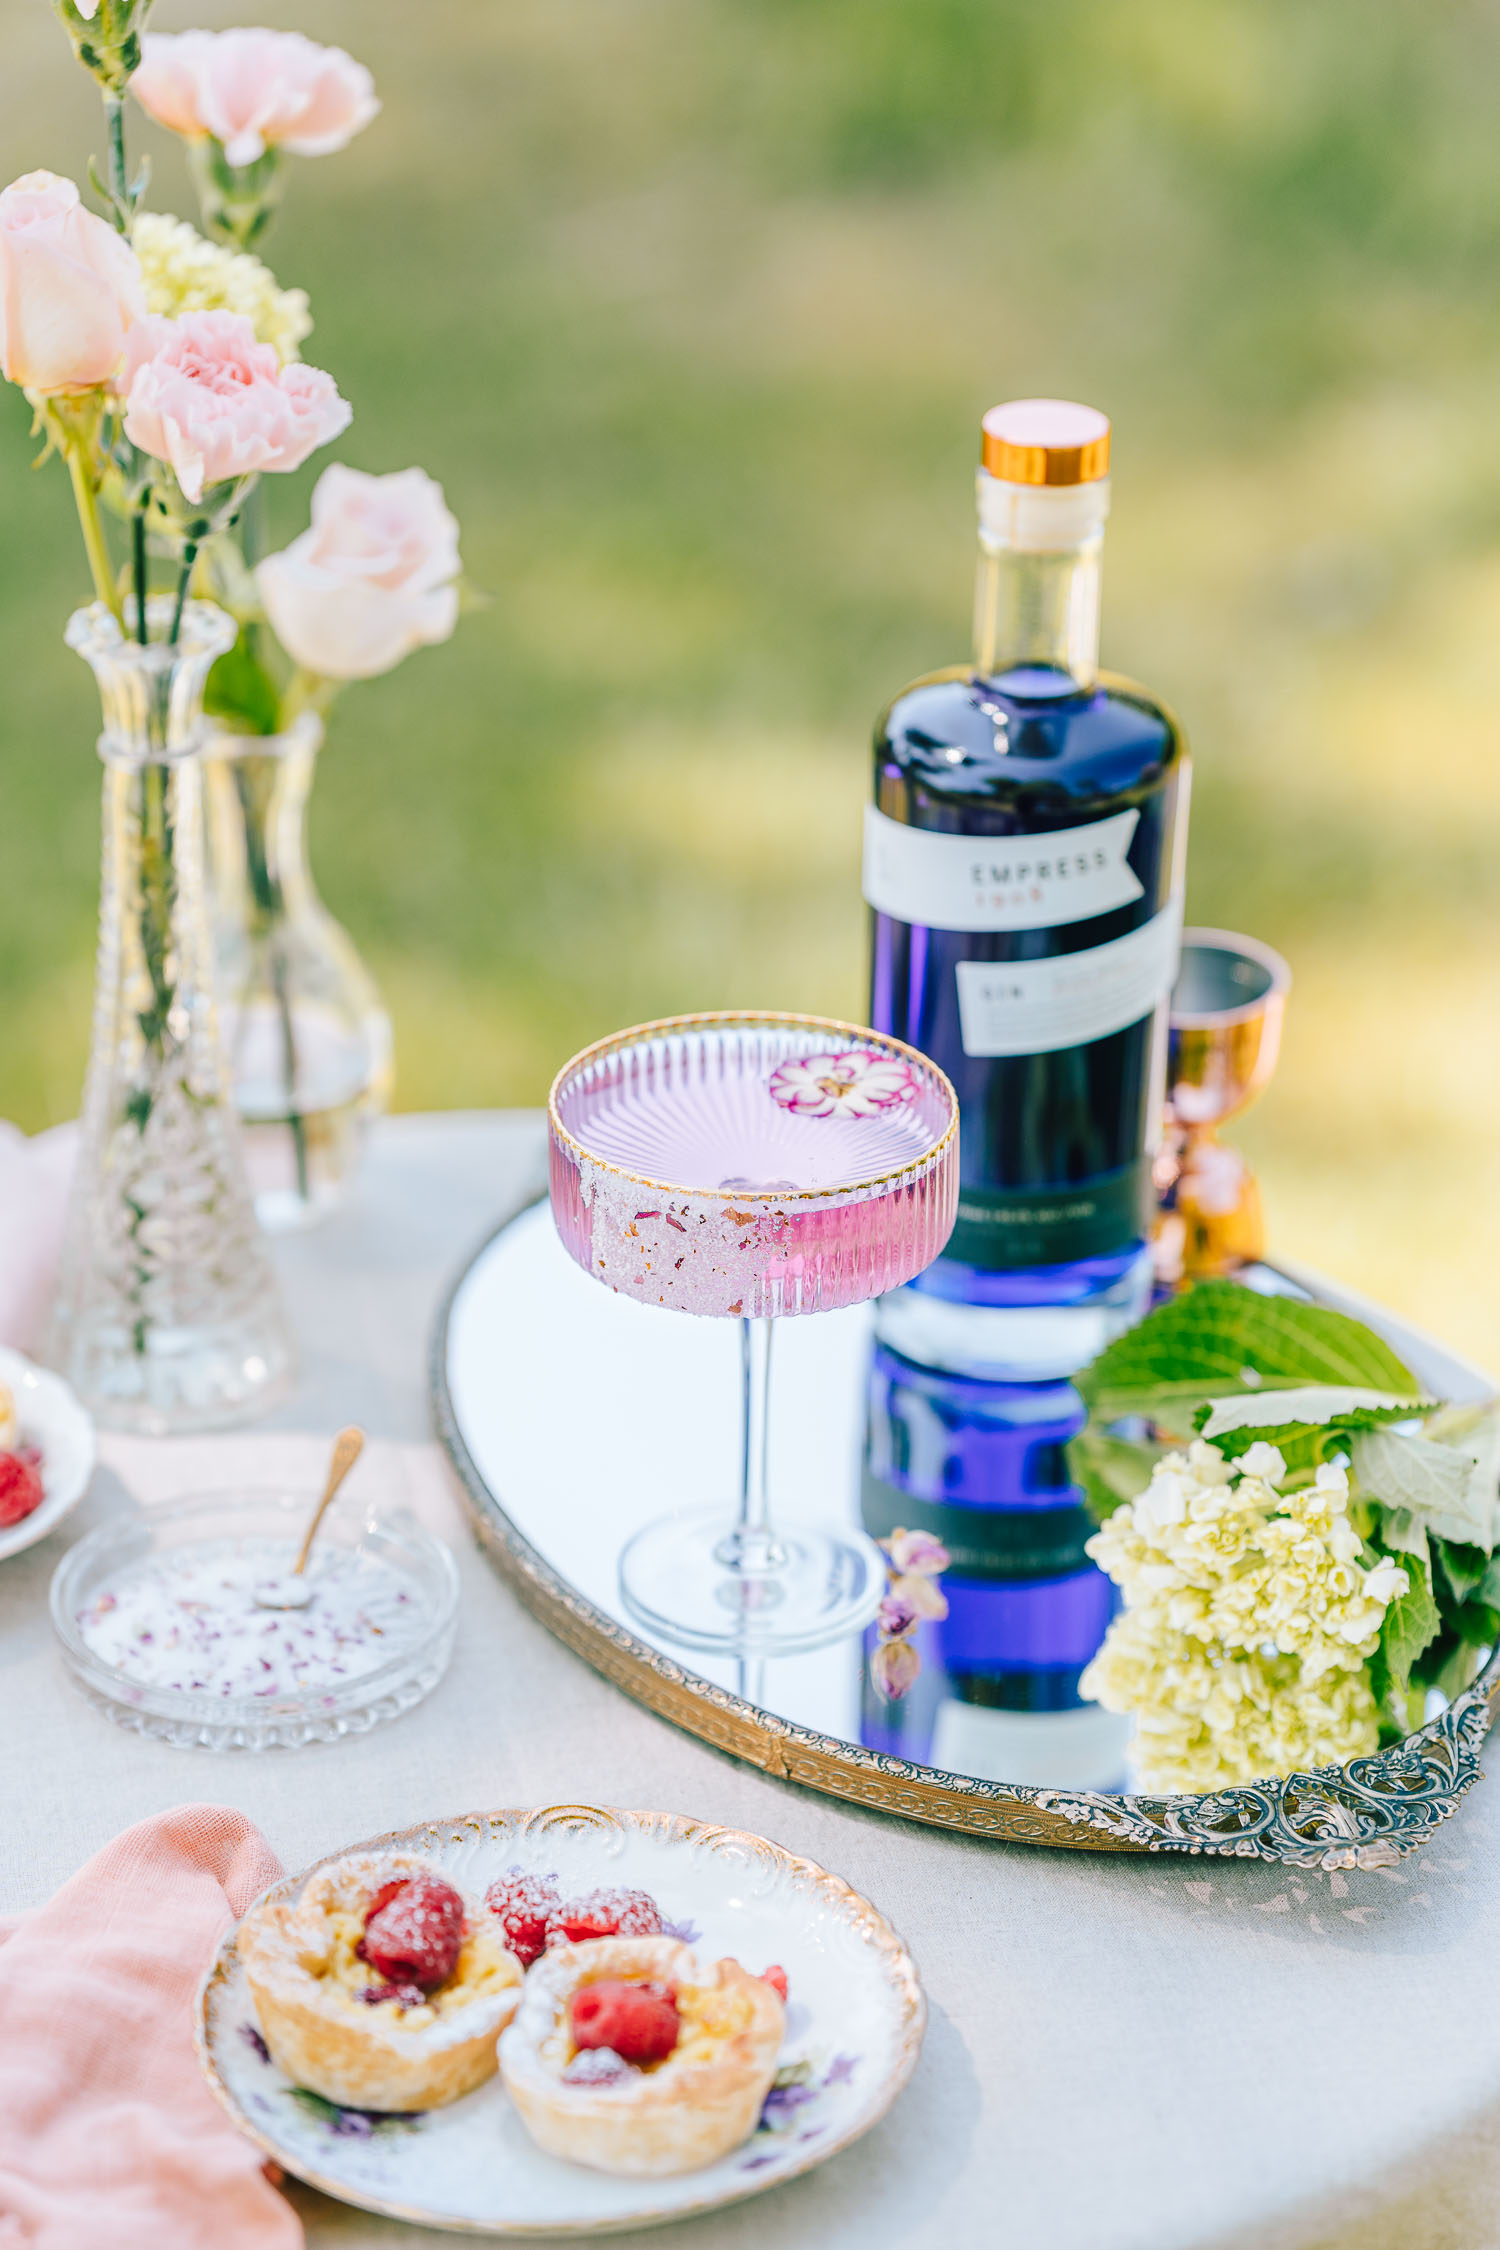 Coupe of rose gin tonic in a garden set on a mirror with bottle of Empress Gin 1908 in the background